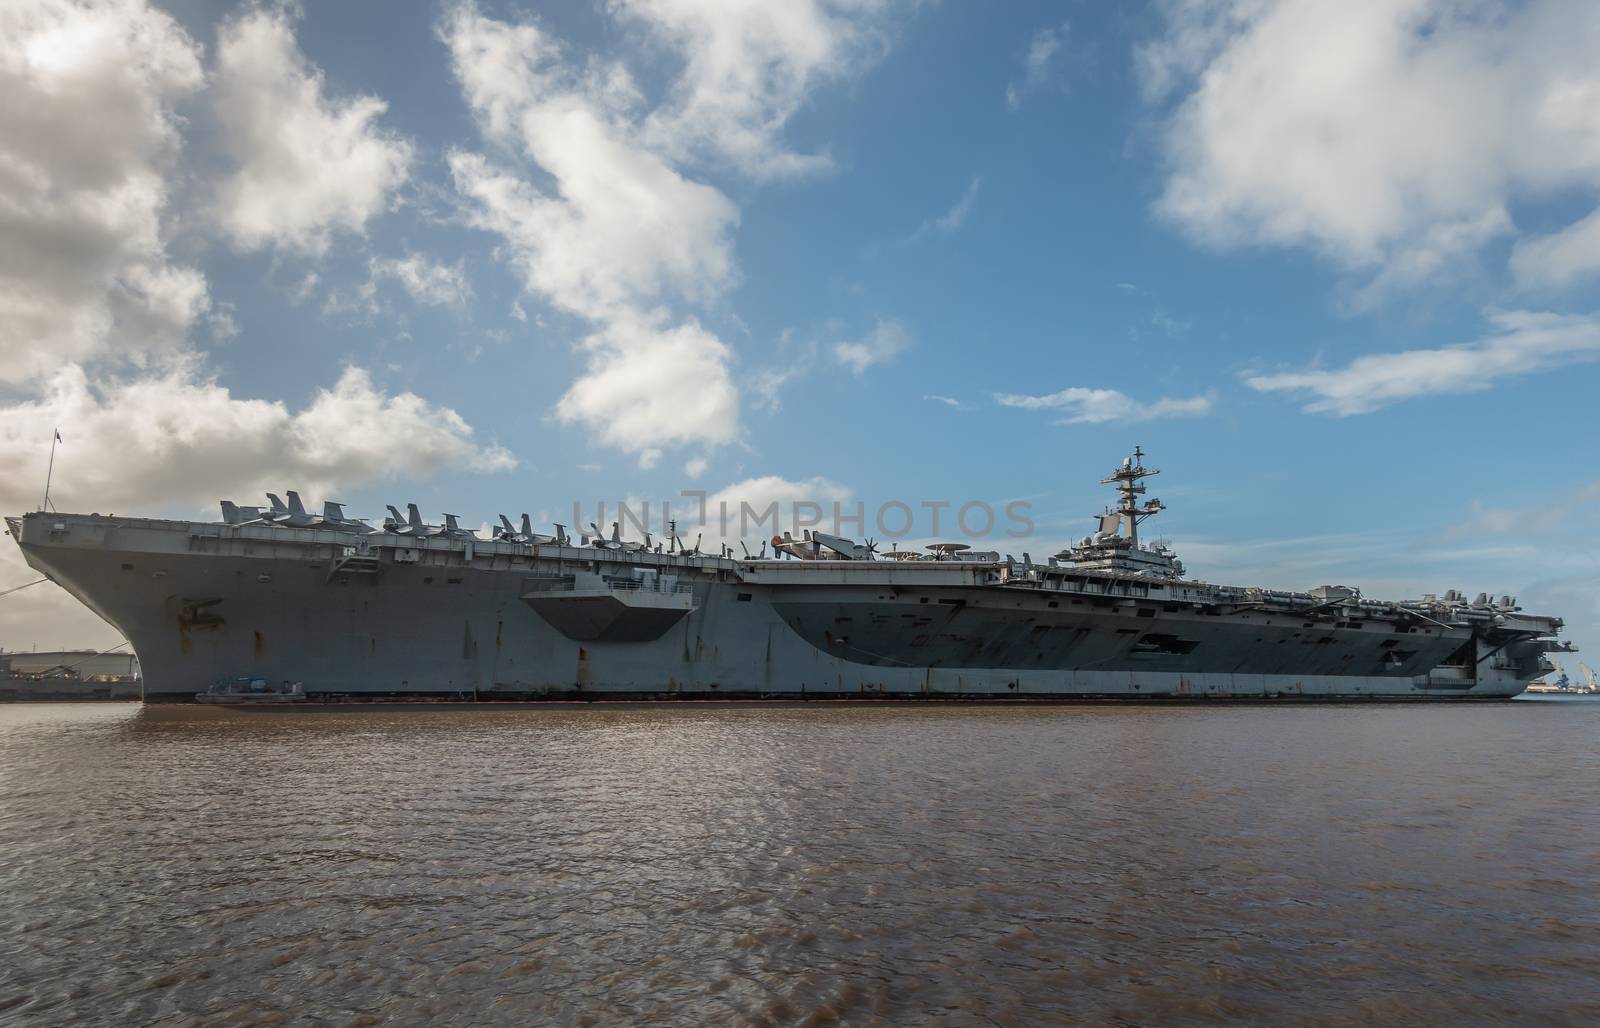 Oahu, Hawaii, USA. - January 10, 2020: Pearl Harbor. Port side of Gray Abraham Lincoln aircraft carrier docked under blue cloudscape on top of brown water.